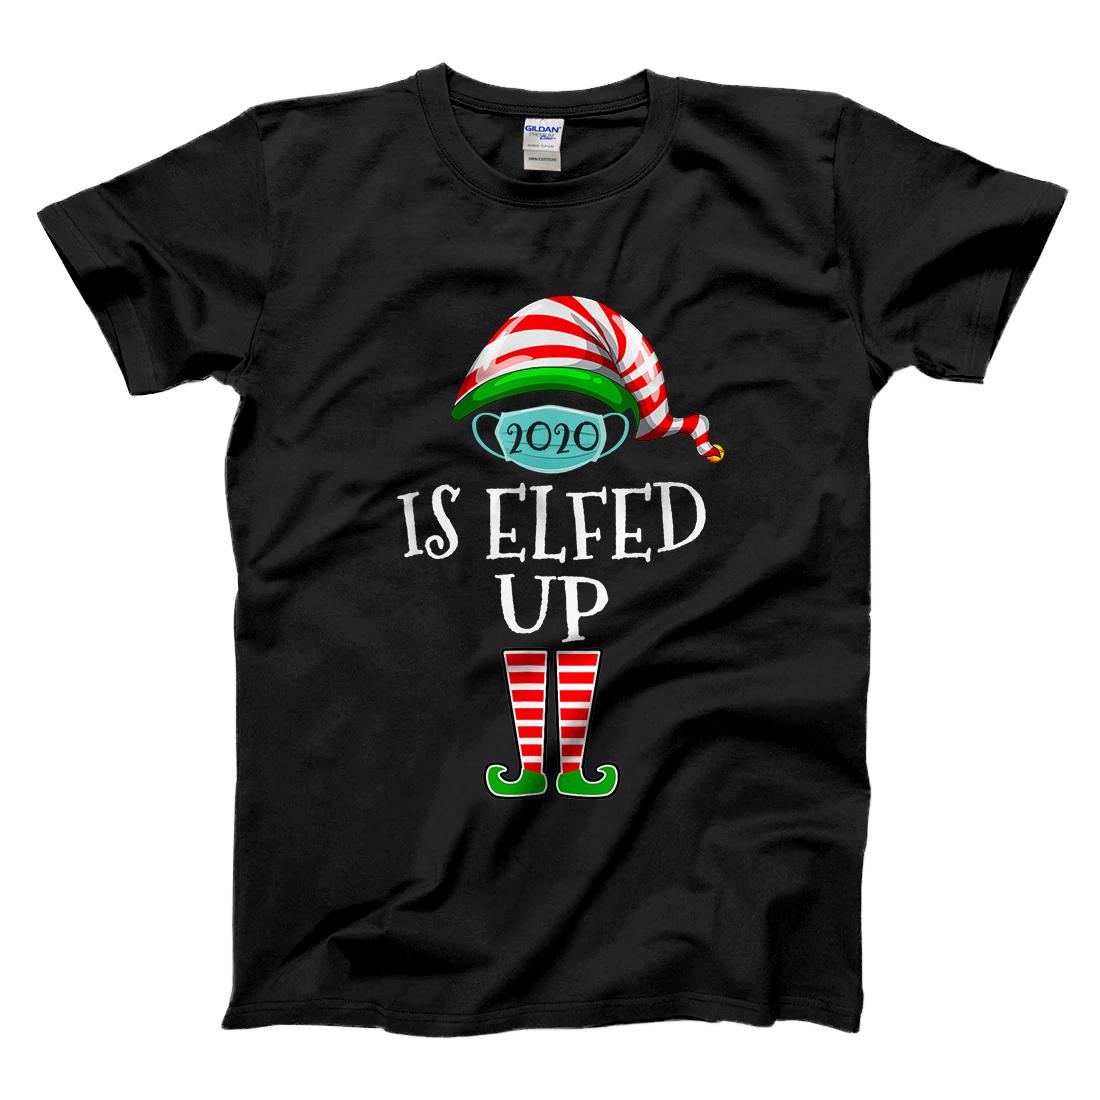 Personalized 2020 Is Elfed Up Christmas Pajama For Family Xmas Face Mask T-Shirt